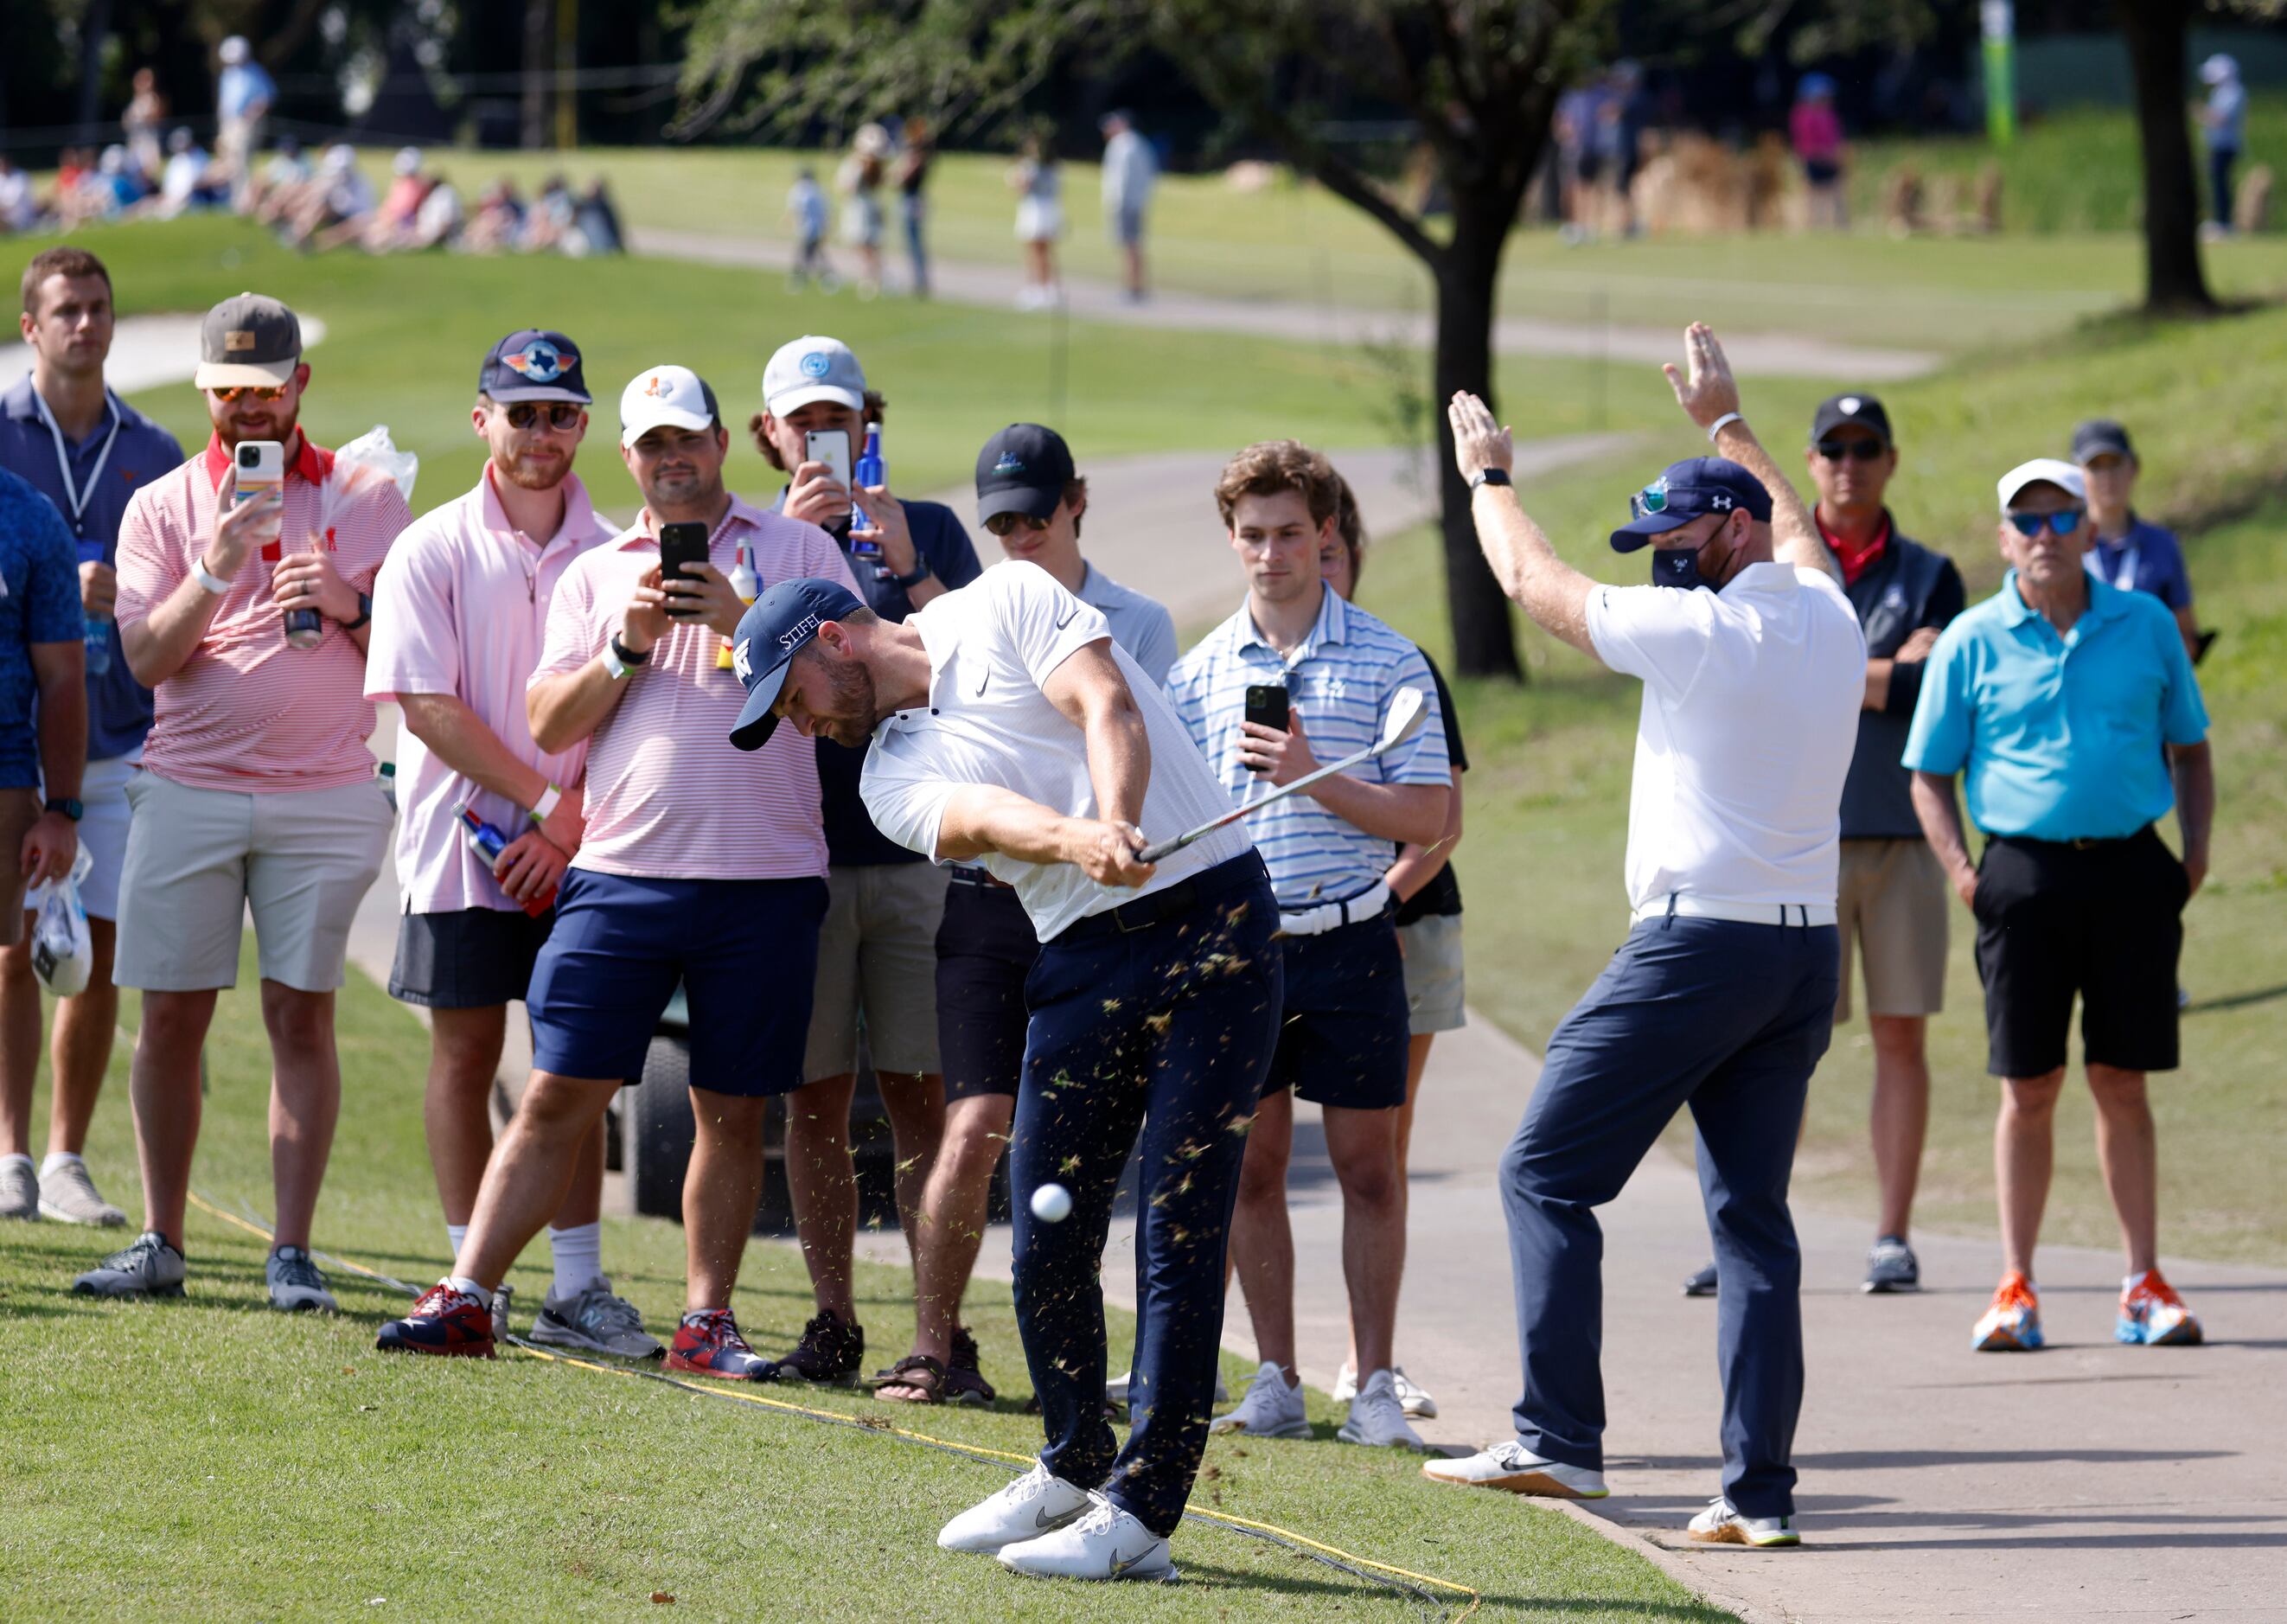 Wyndham Clark hits from the rough on the 16th hole during round 1 of the AT&T Byron Nelson ...